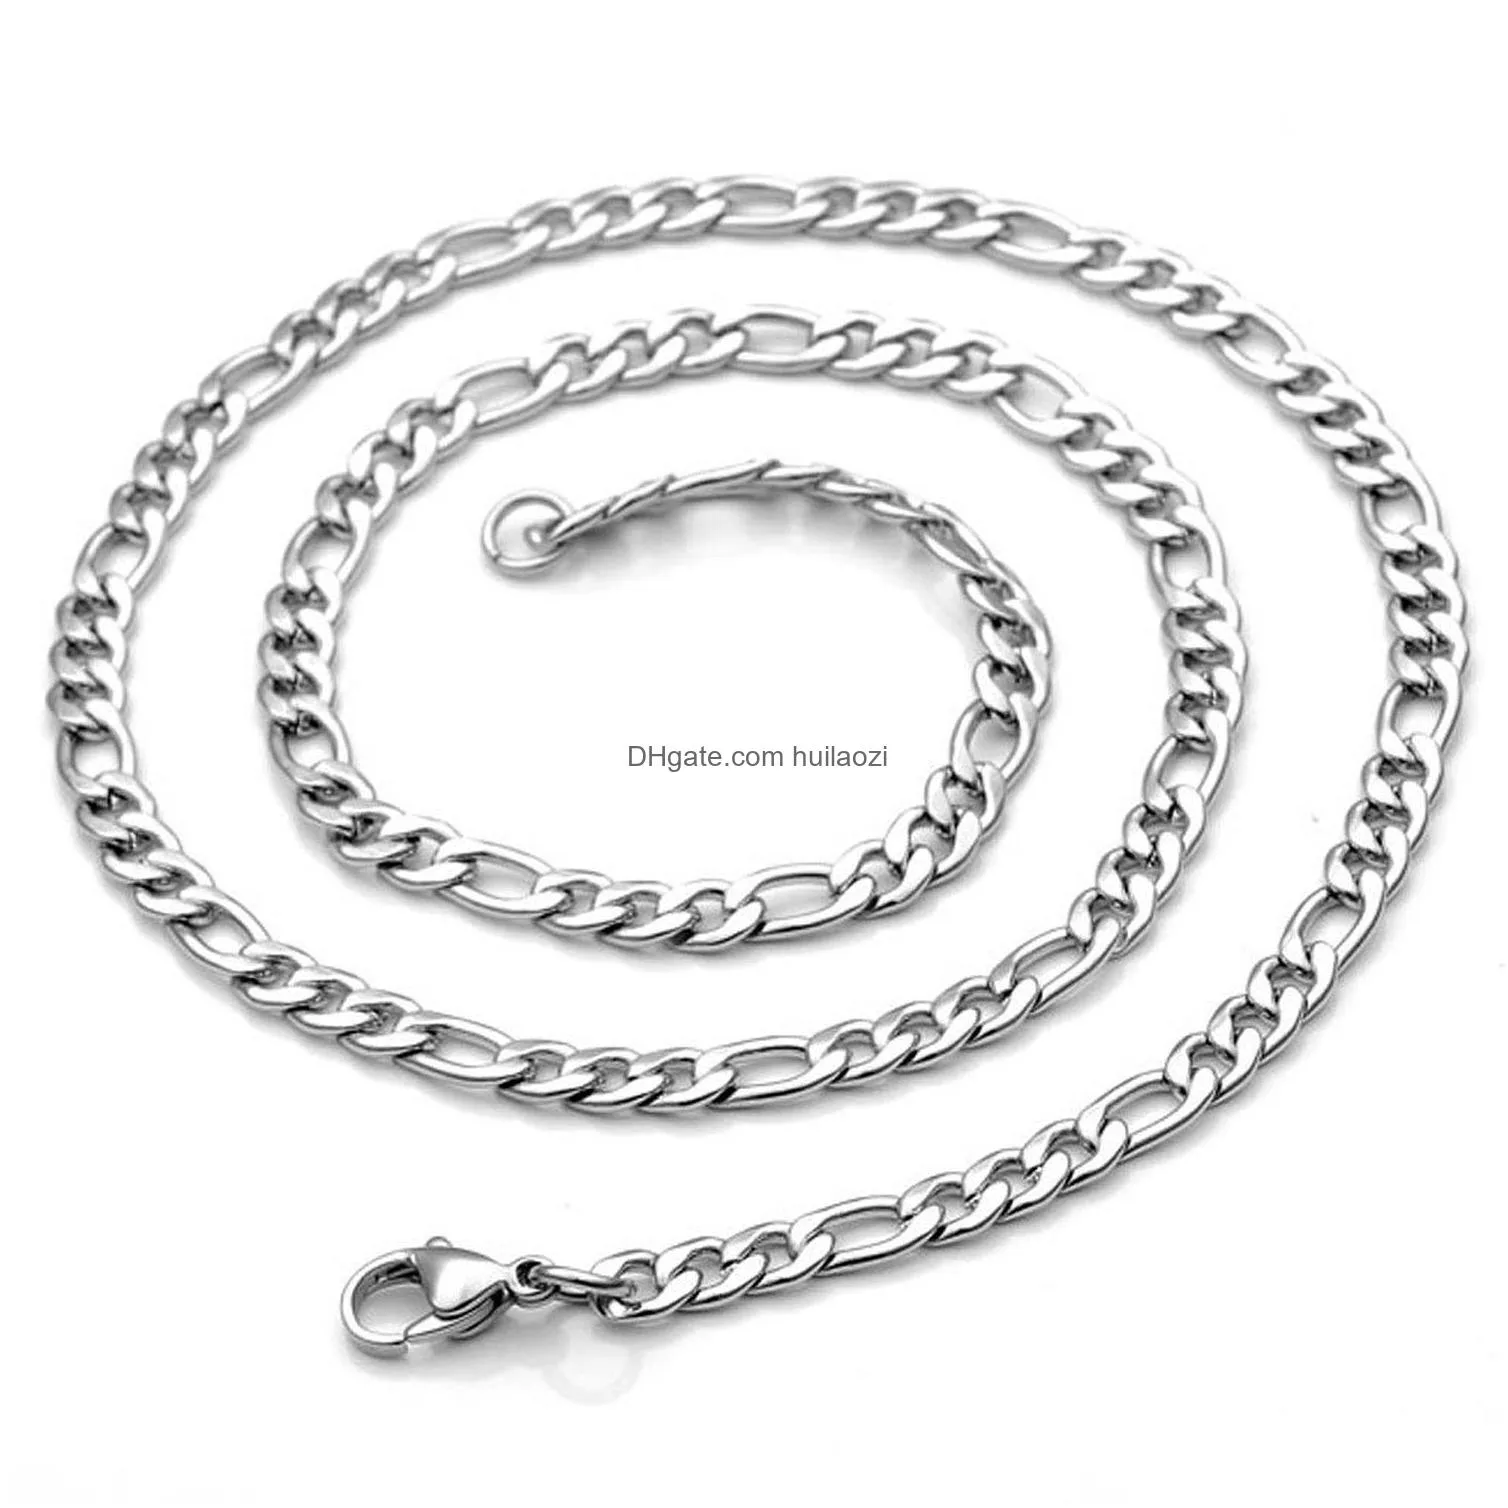 3mm/5mm/7mm/10mm stainless steel flat figaro curb cuban chain link for men women necklace 18-30 inch length with velvet bag